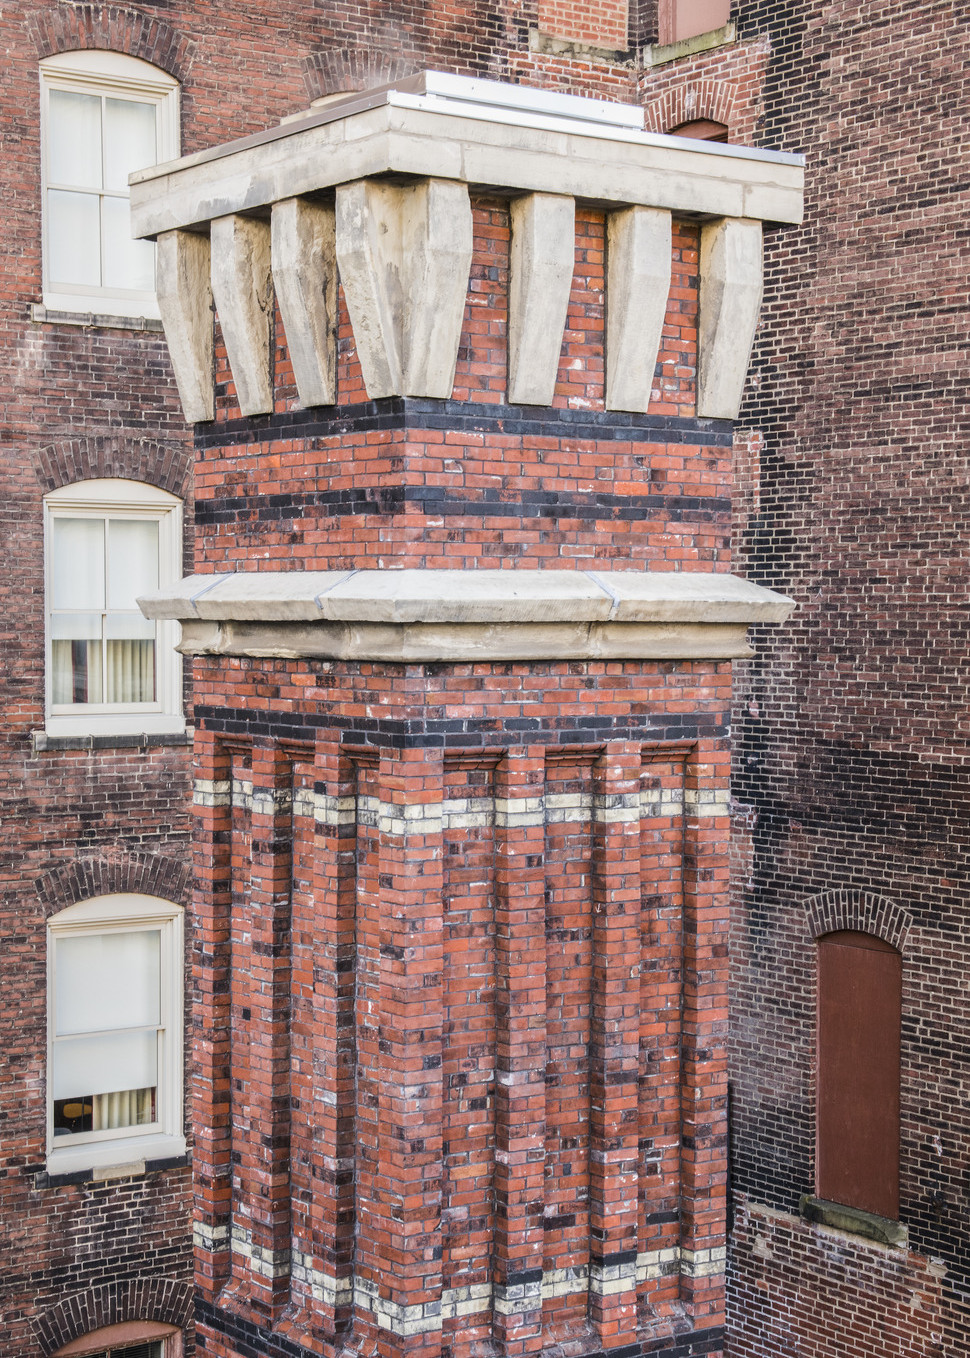 Red brick chimney with black and white horizontal stripes and light colored stone details at top in front of a brick wall